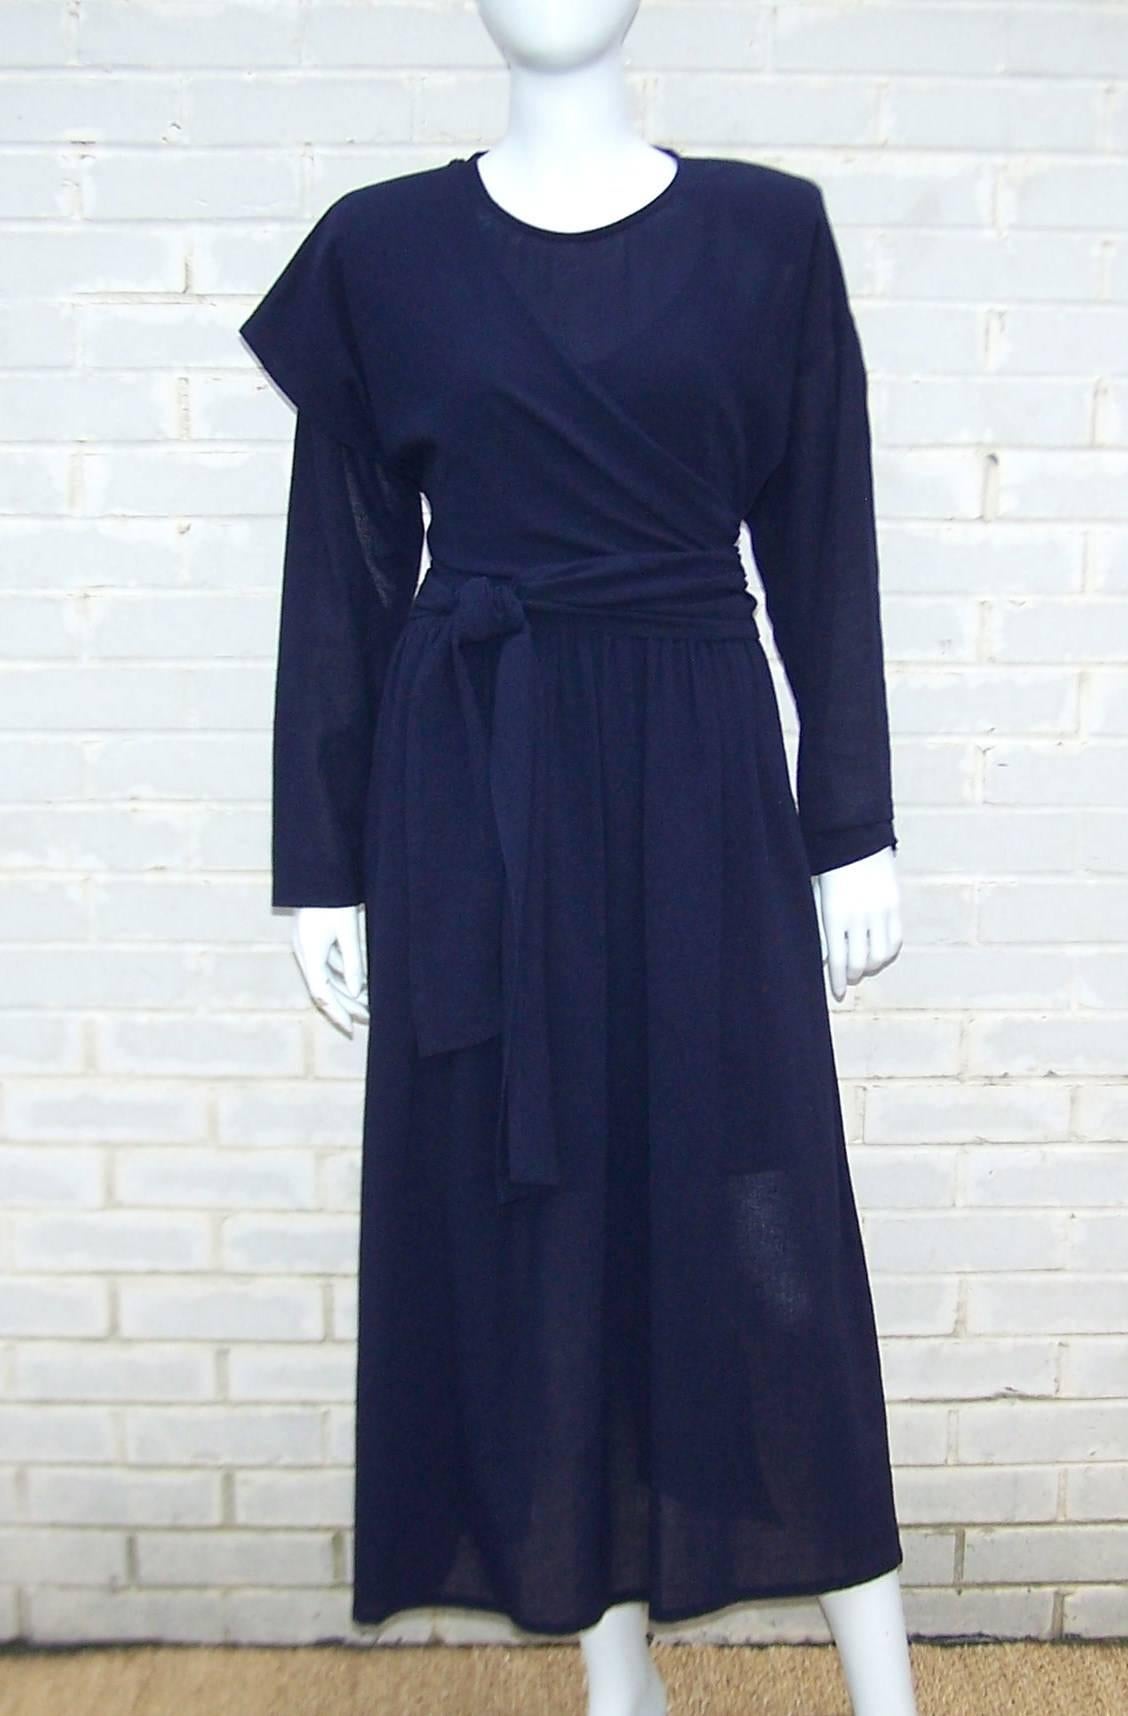 We love the futuristic austerity of this 1980's Sonia Rykiel design.  The deconstructed navy blue dress is a sheer weave cotton with a dolman style bodice and full skirt with soft pleating at the relaxed waist and side pockets.  The wrap is provided